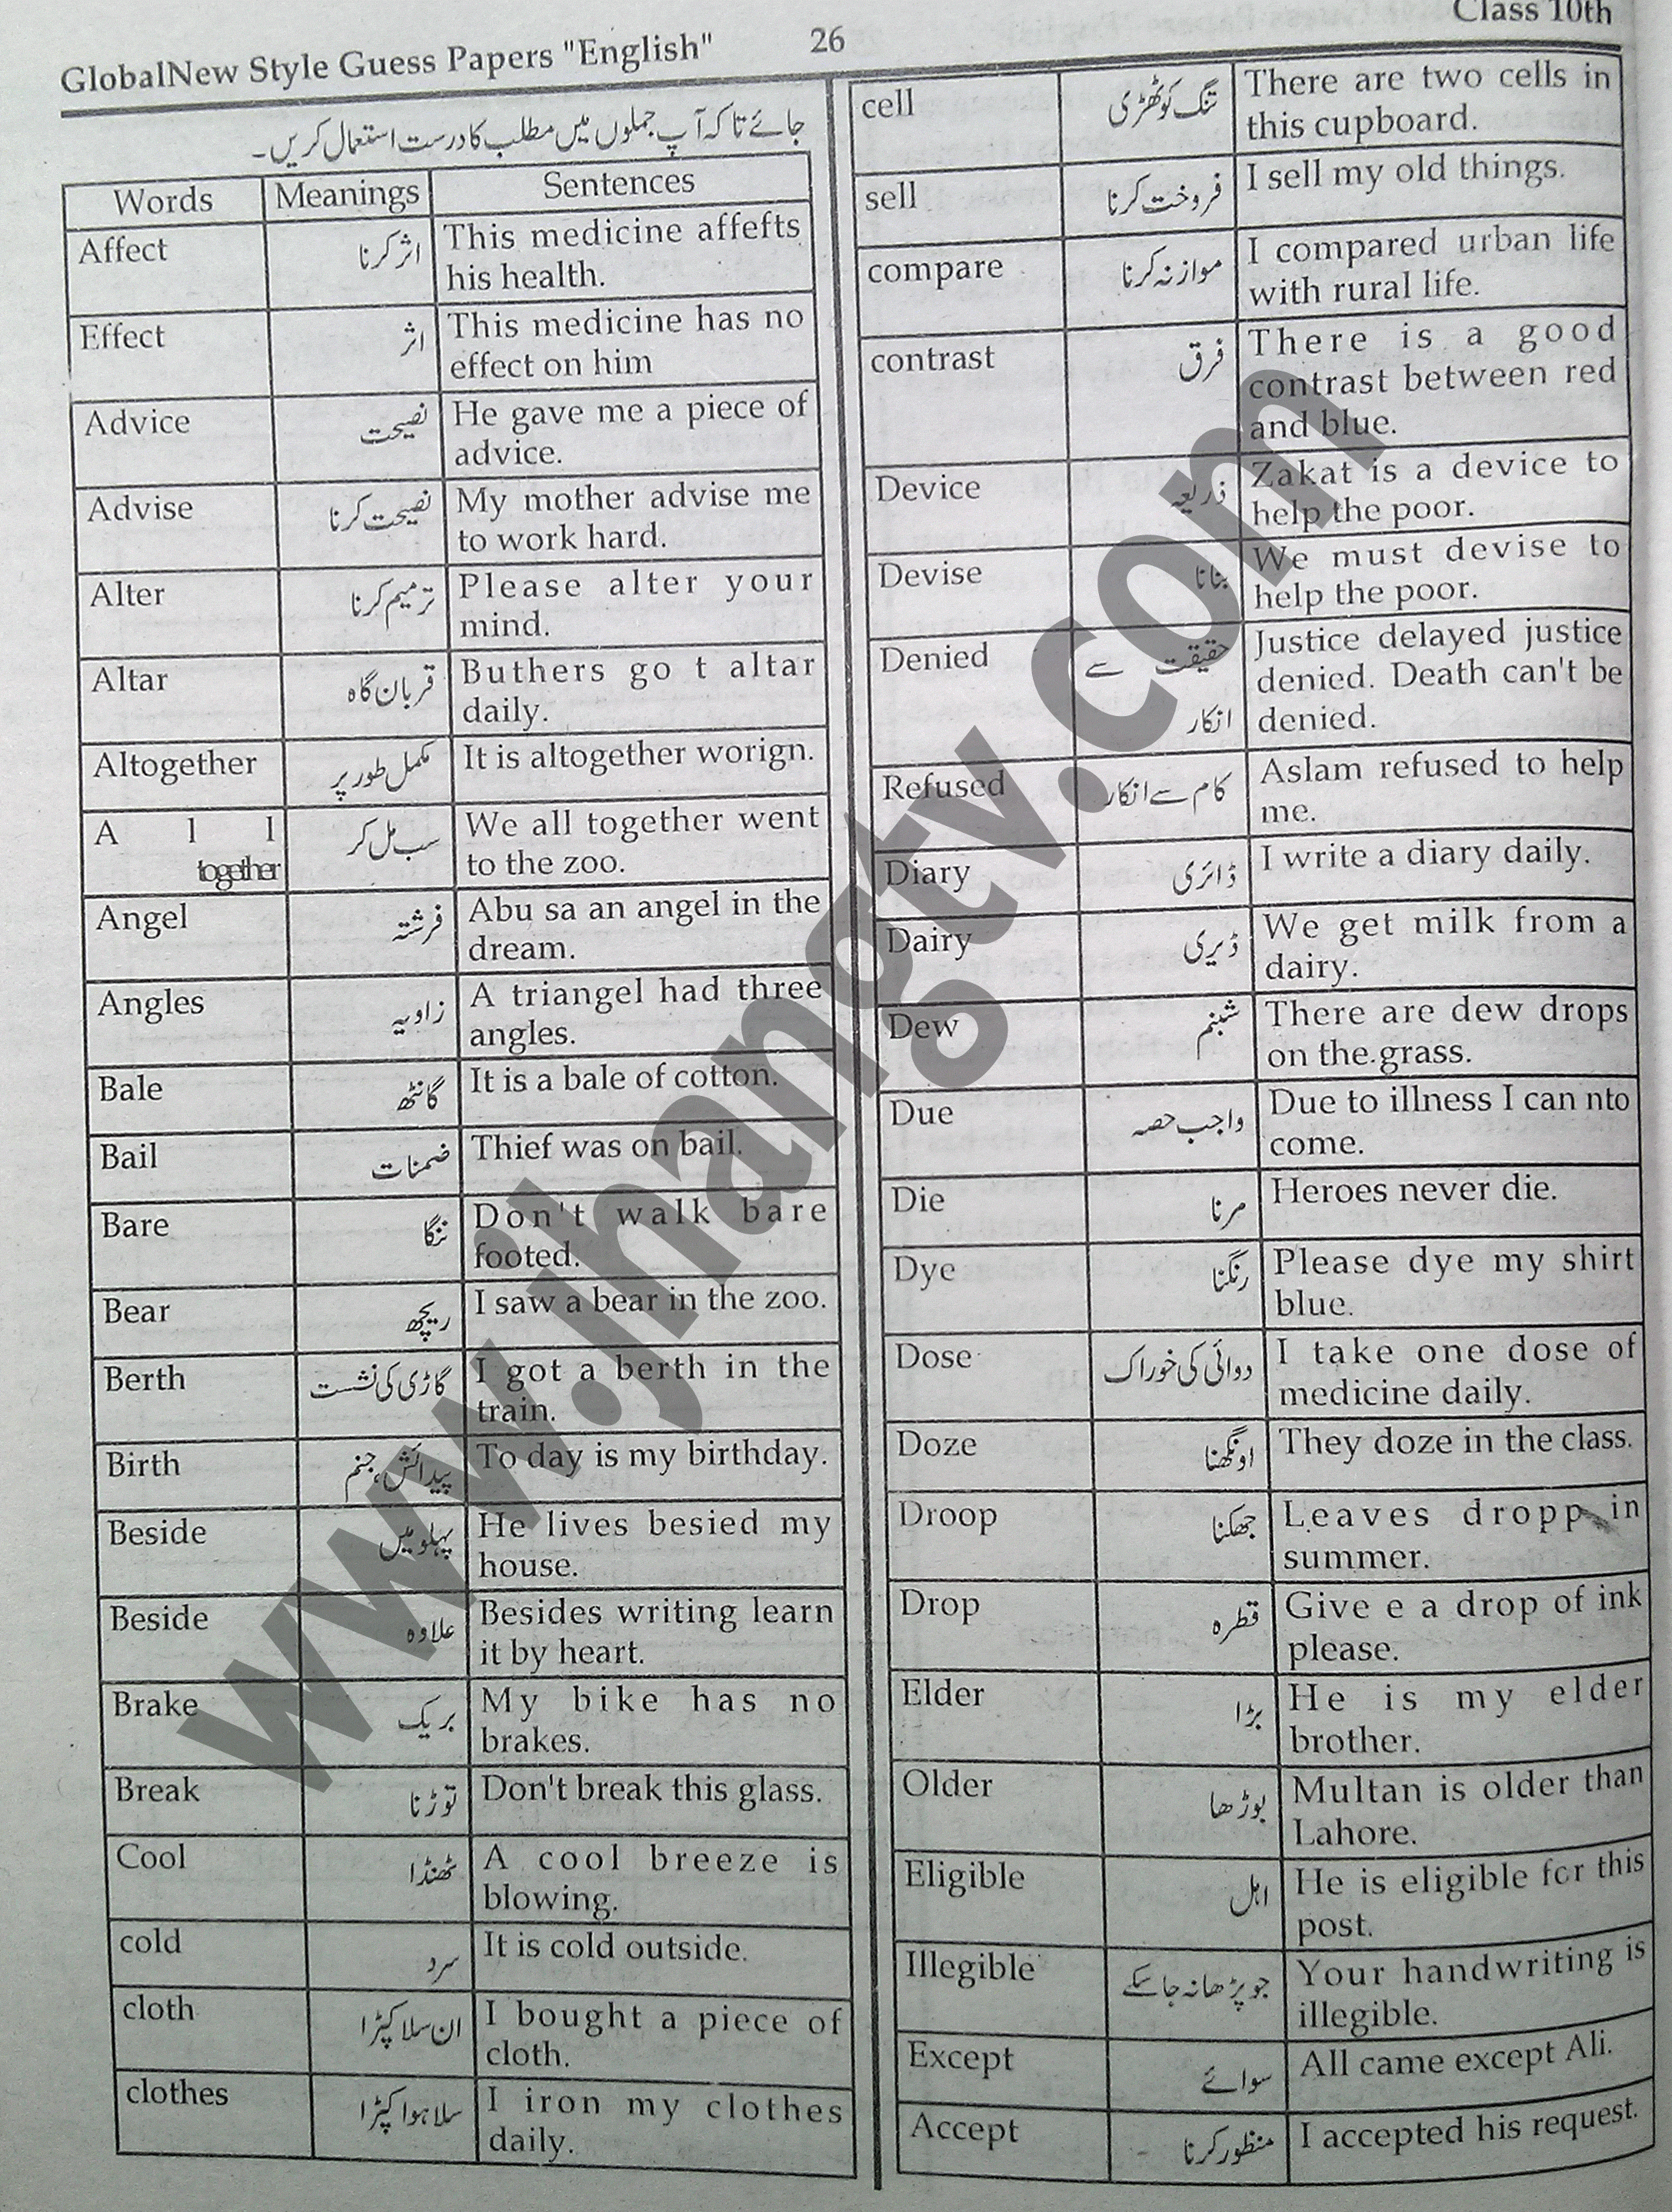 10th Class Guess Papers 2015 English (26)